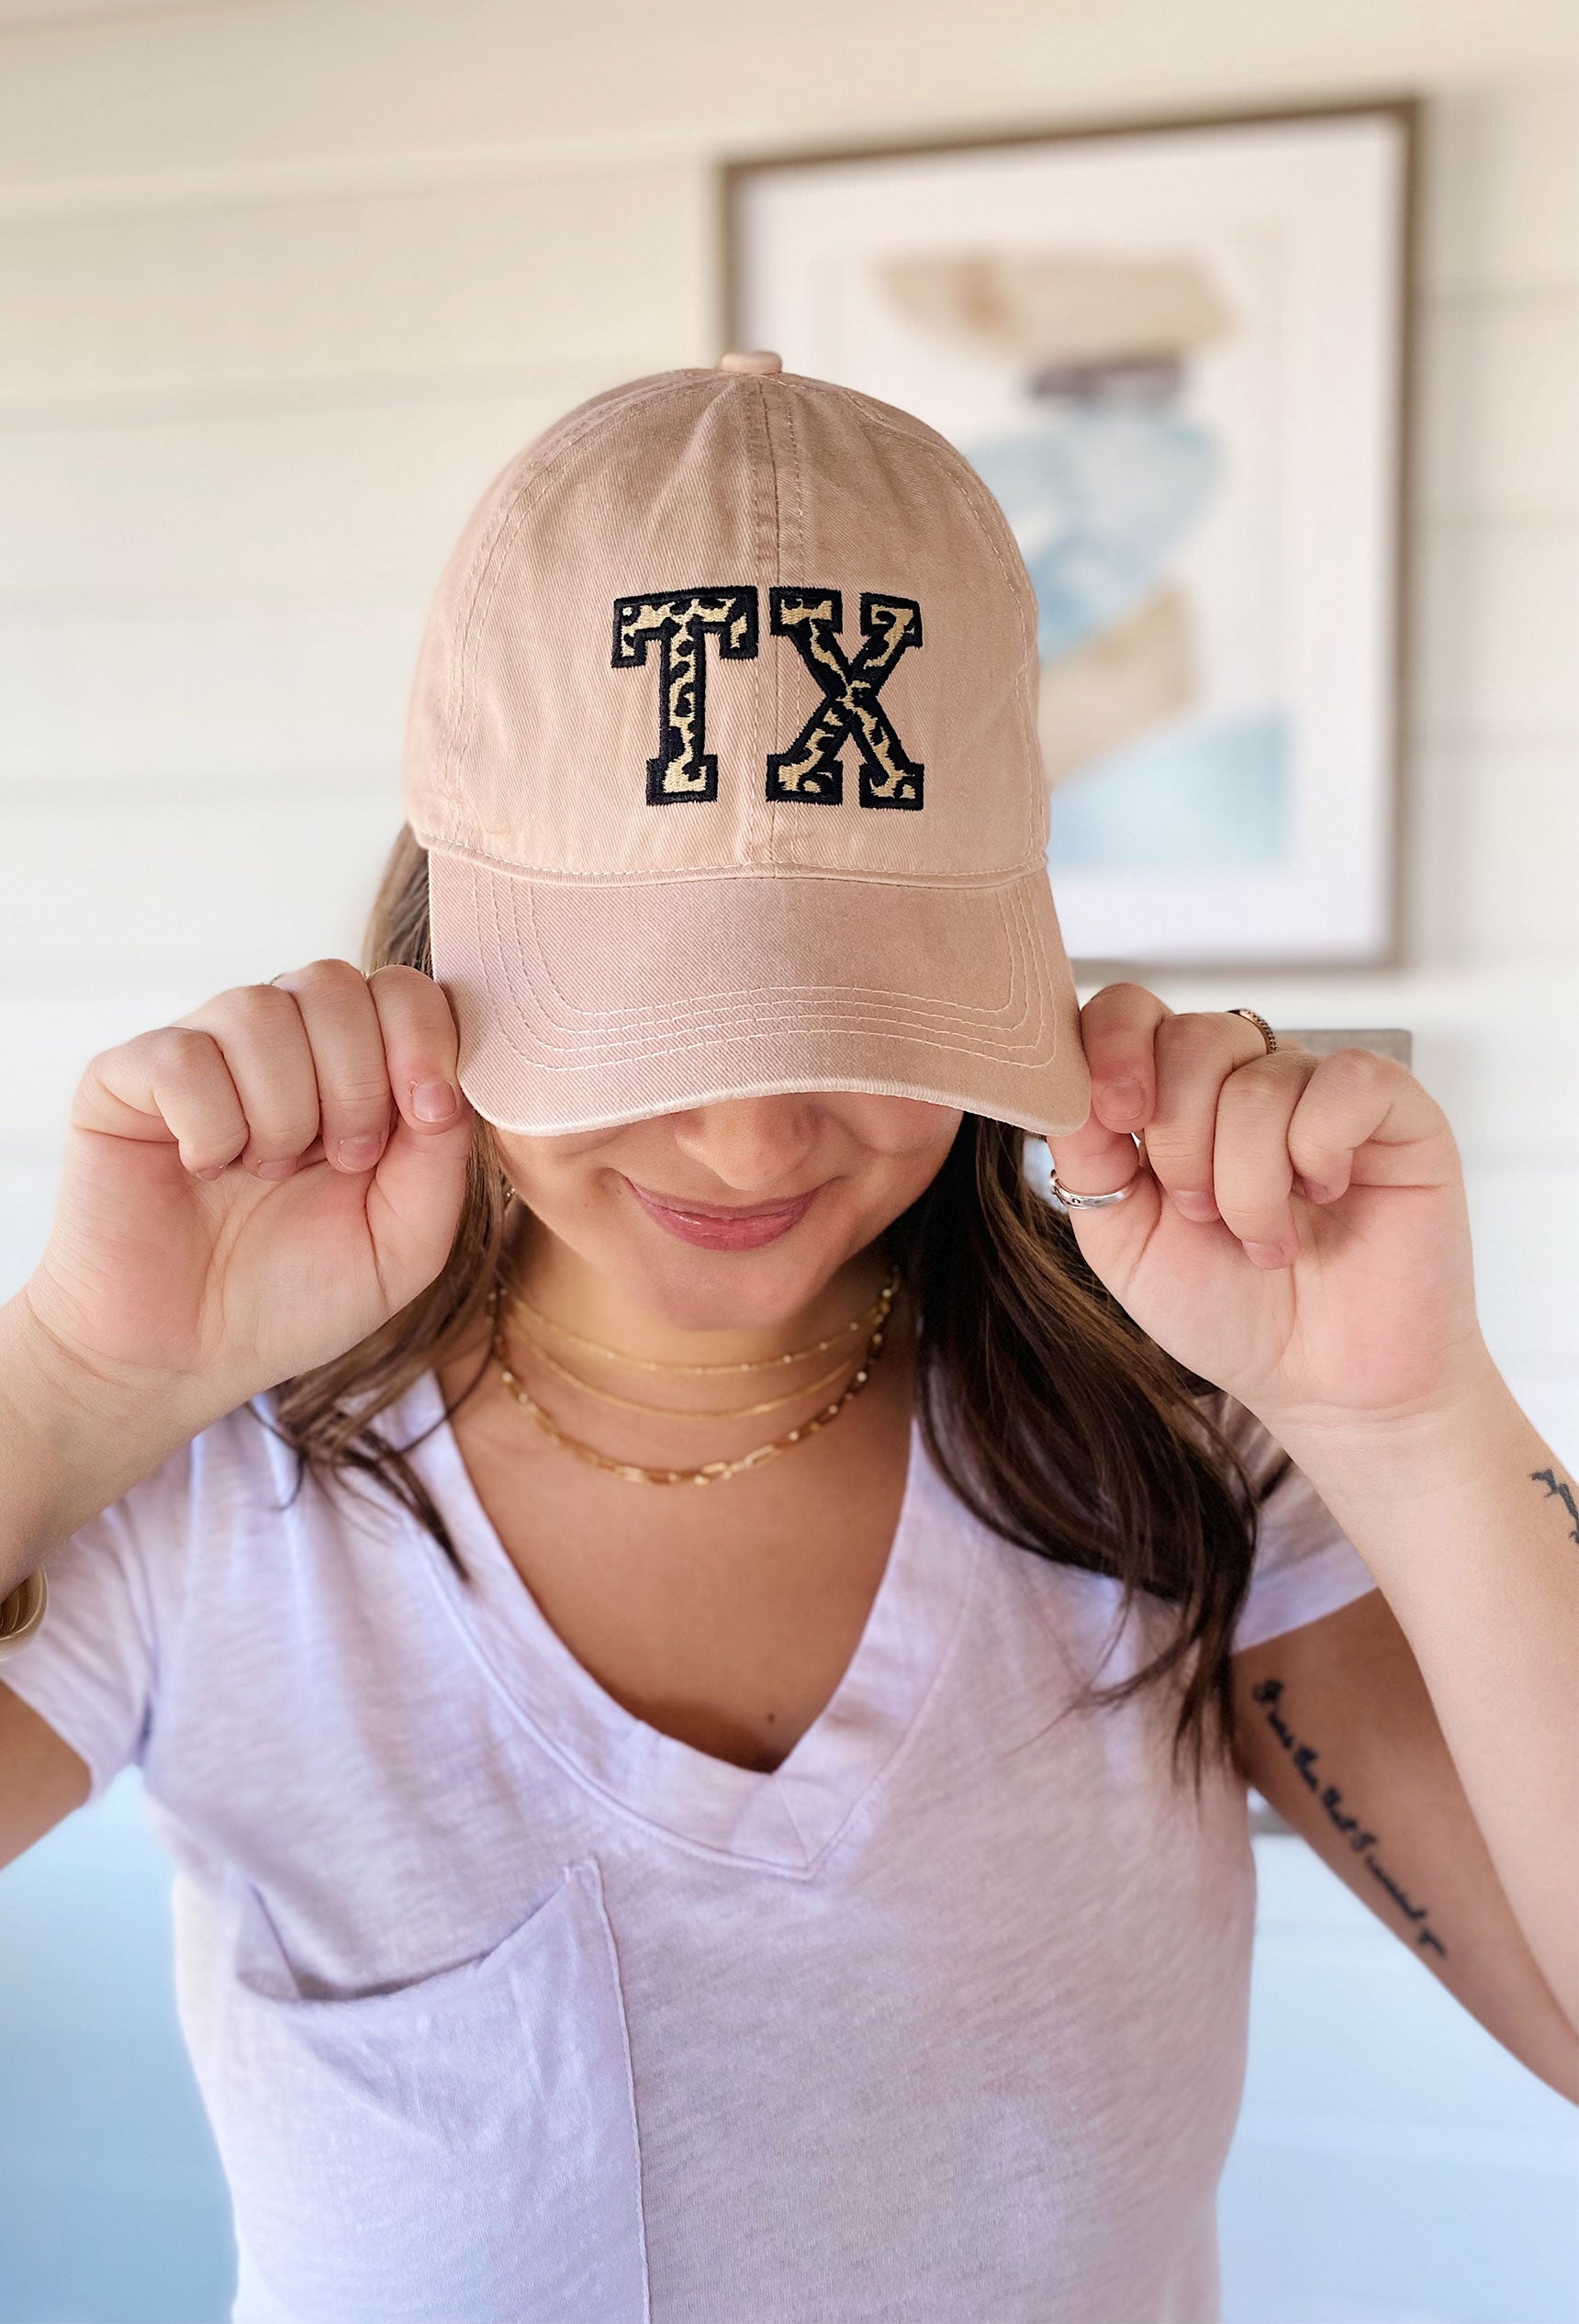 Lropard Texas Baseball Cap in Dusty Pink, washed construction and leopard print TX patch